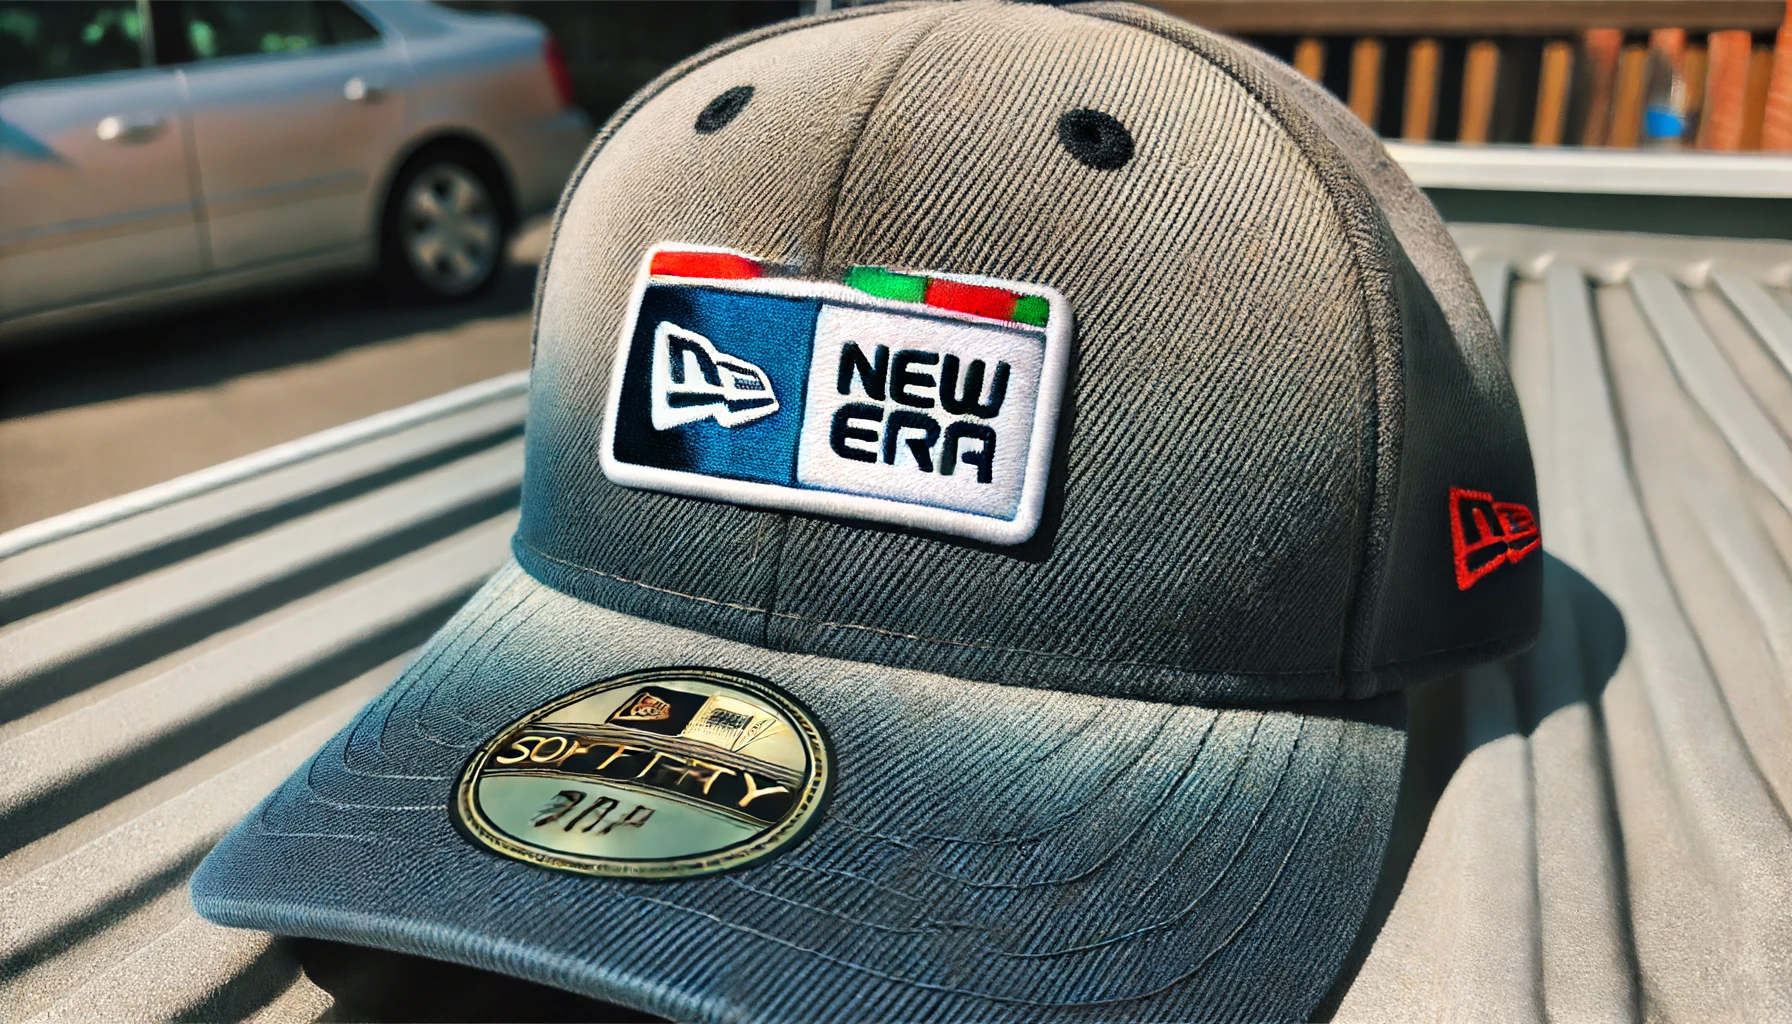 A New Era cap with a sun-faded and discolored sticker on the brim. The cap is outdoors, showing the effects of prolonged sun exposure on the sticker.